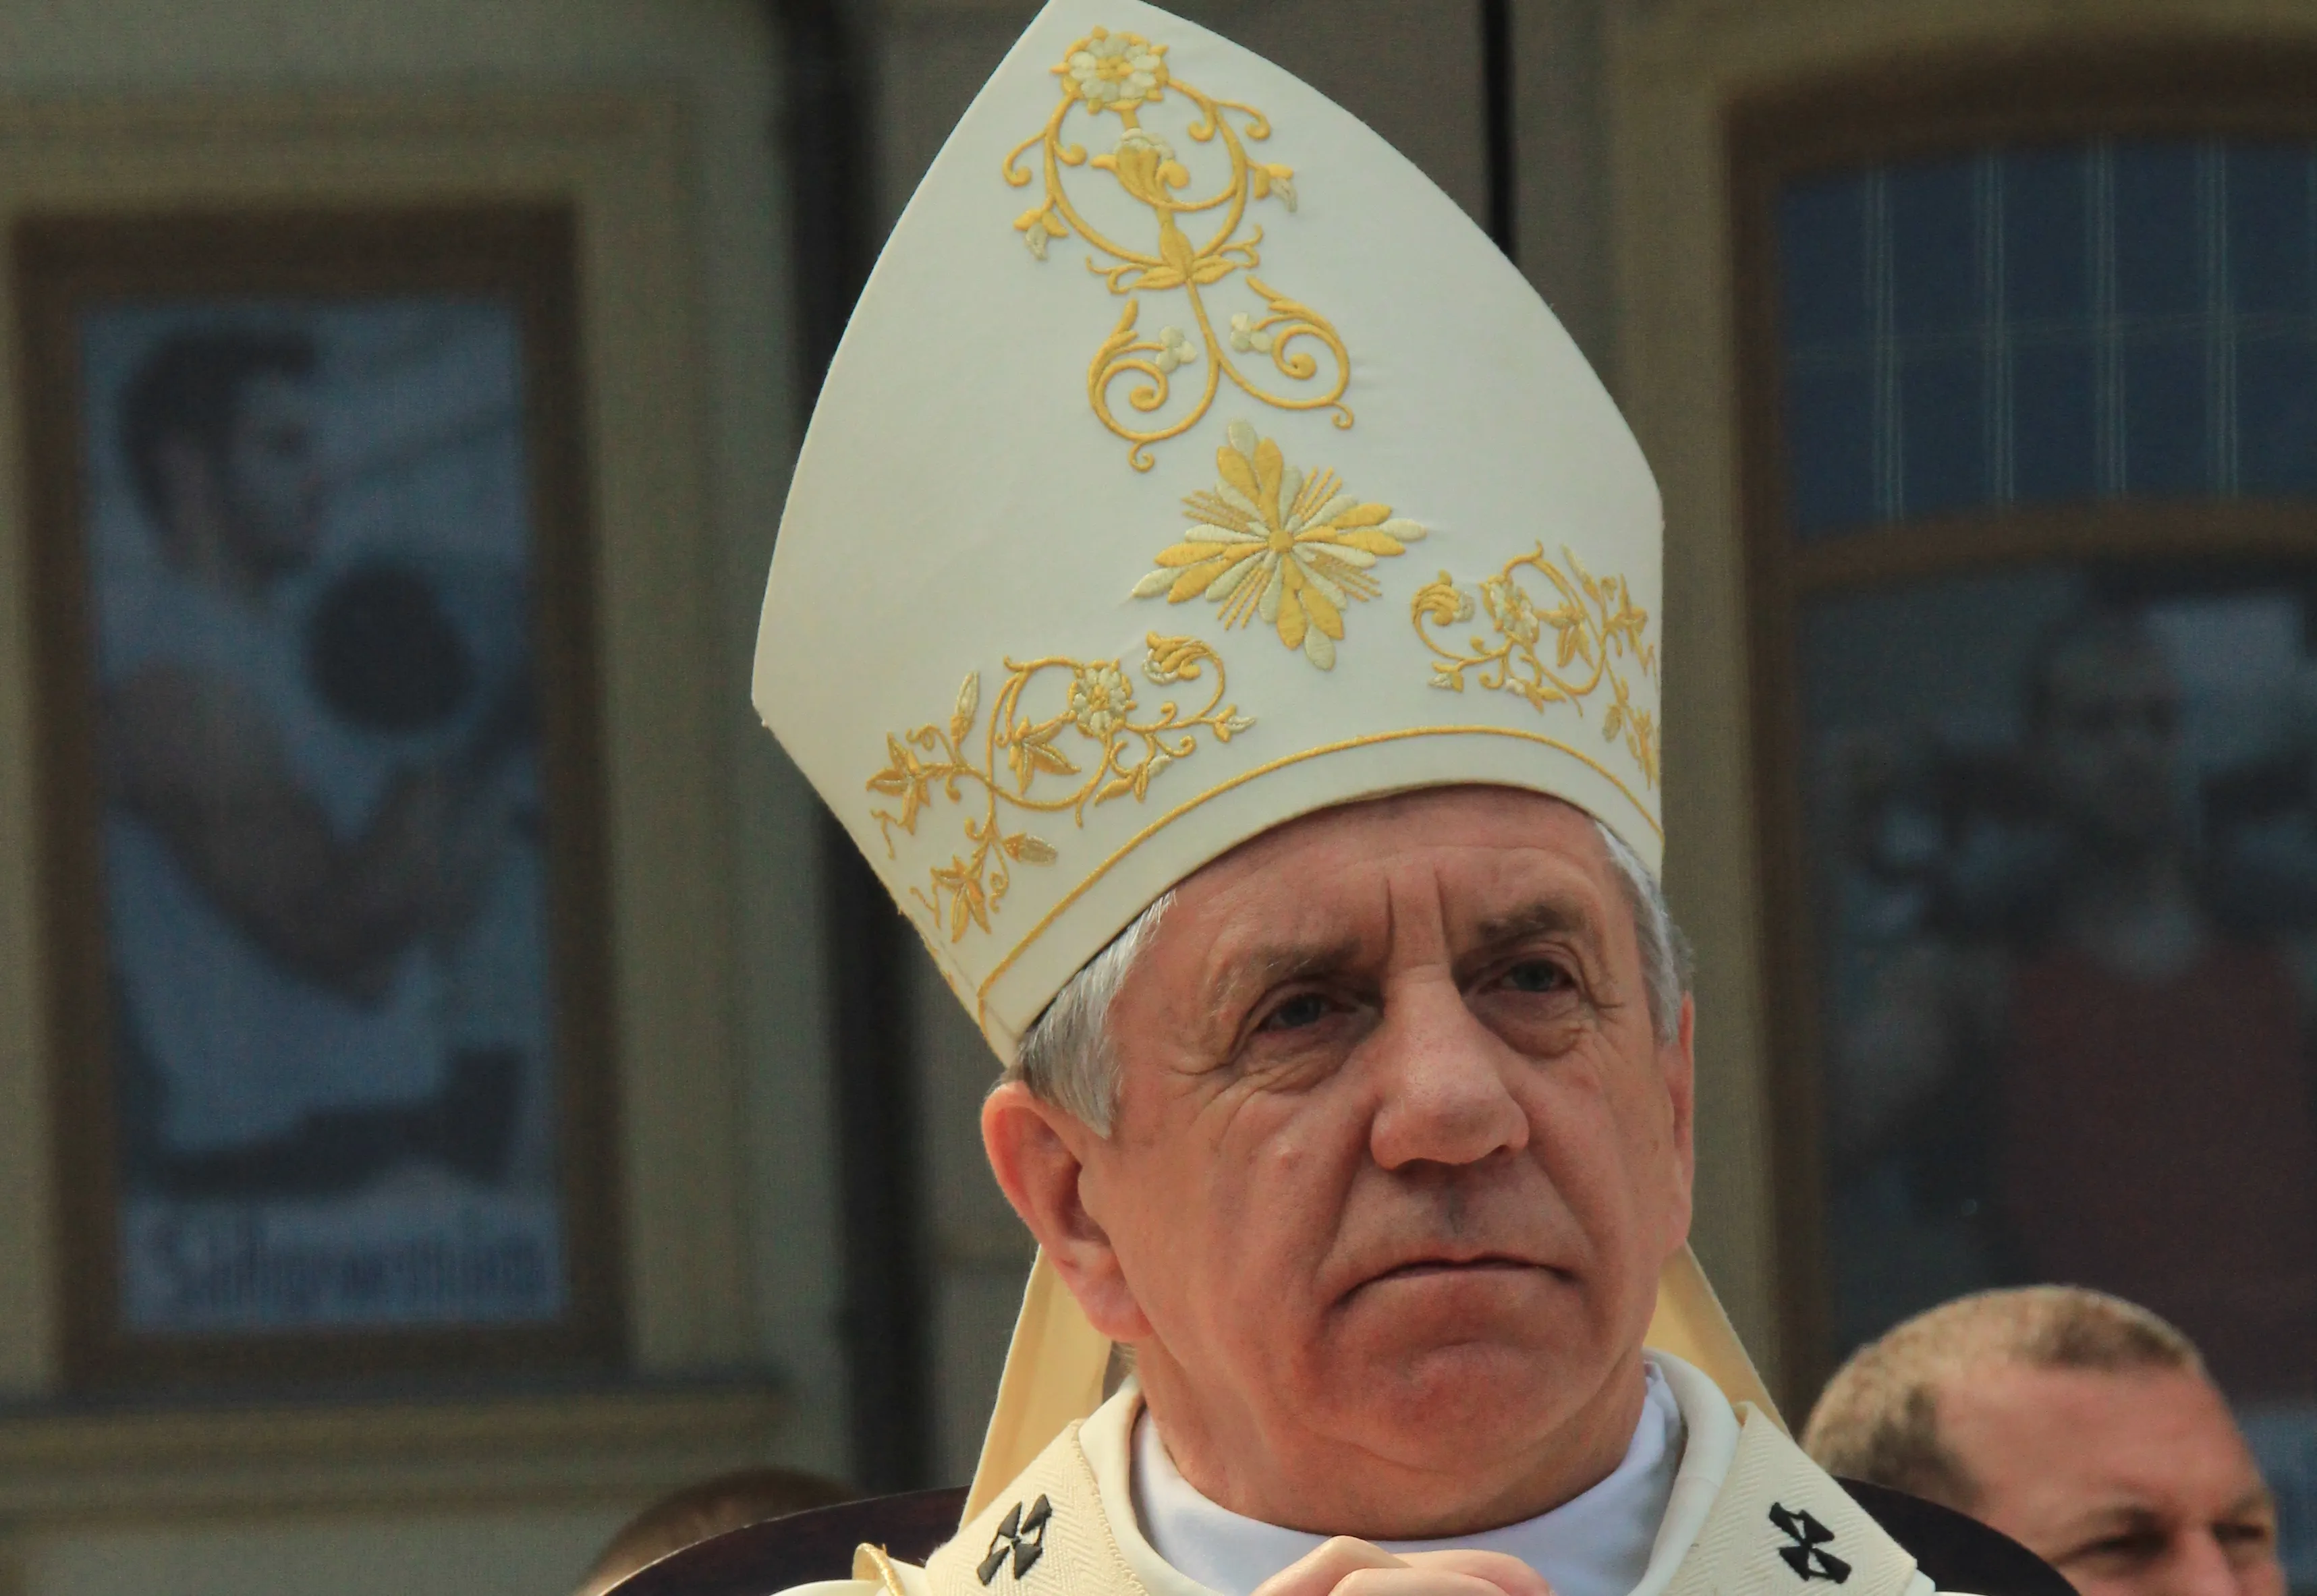 The Apostolic Nunciature of Poland has revealed further information regarding the resignation of Polish Archbishop Andrzej Dzięga, indicating that he stepped down due to alleged negligence in overseeing sexual abuse claims.?w=200&h=150